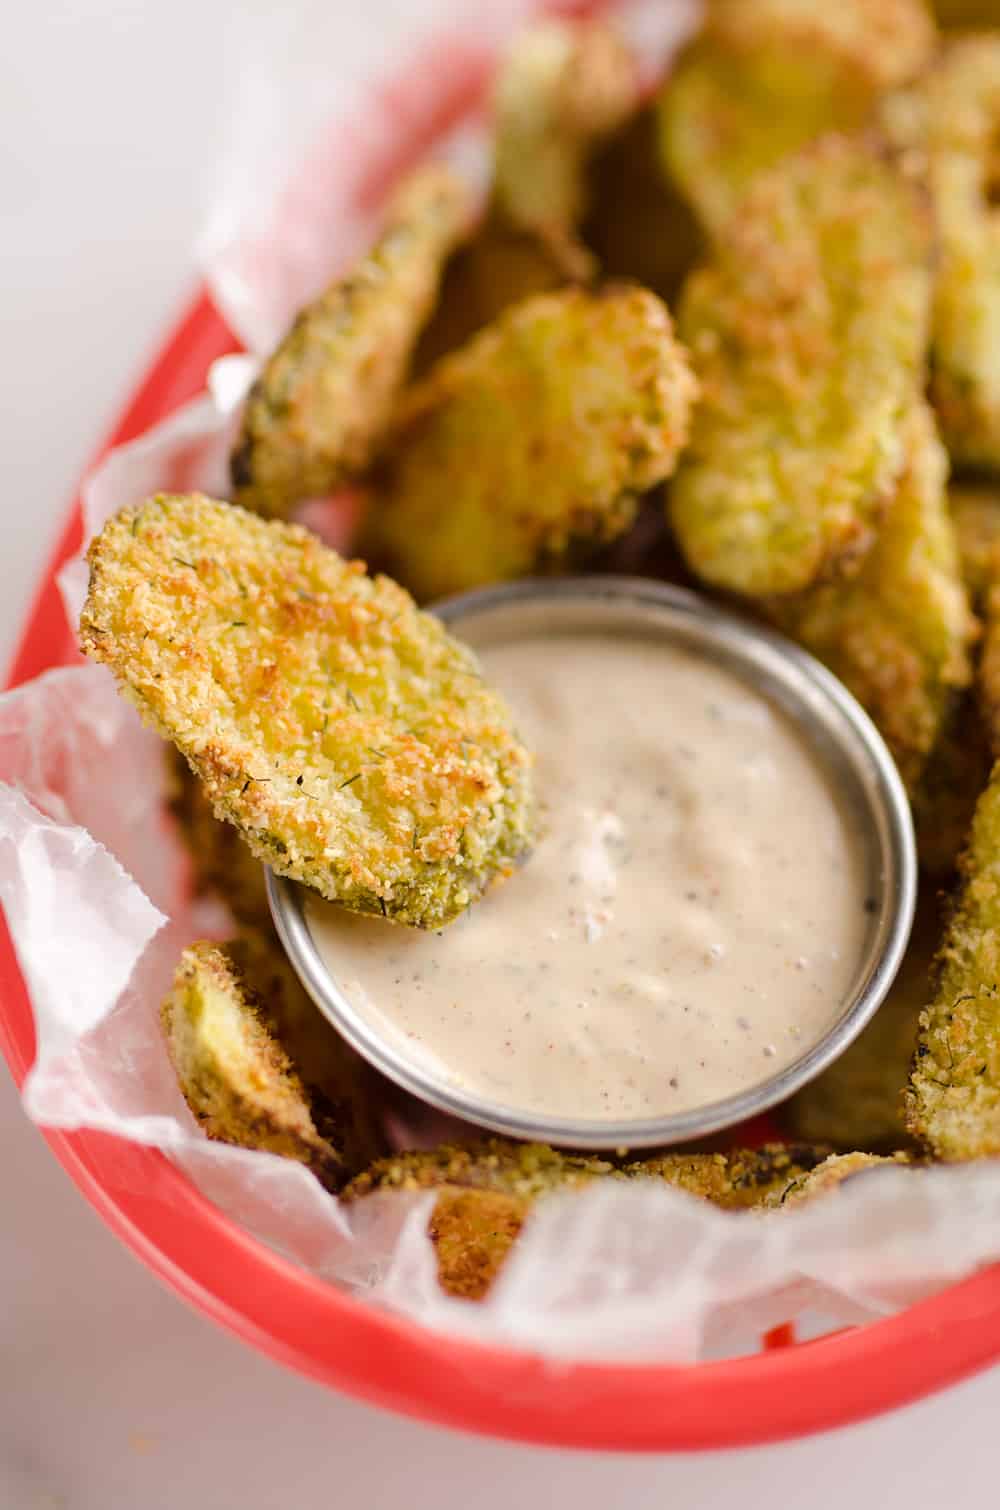 Airfryer Parmesan Dill Fried Pickle Chips 5 Ingredient Snack